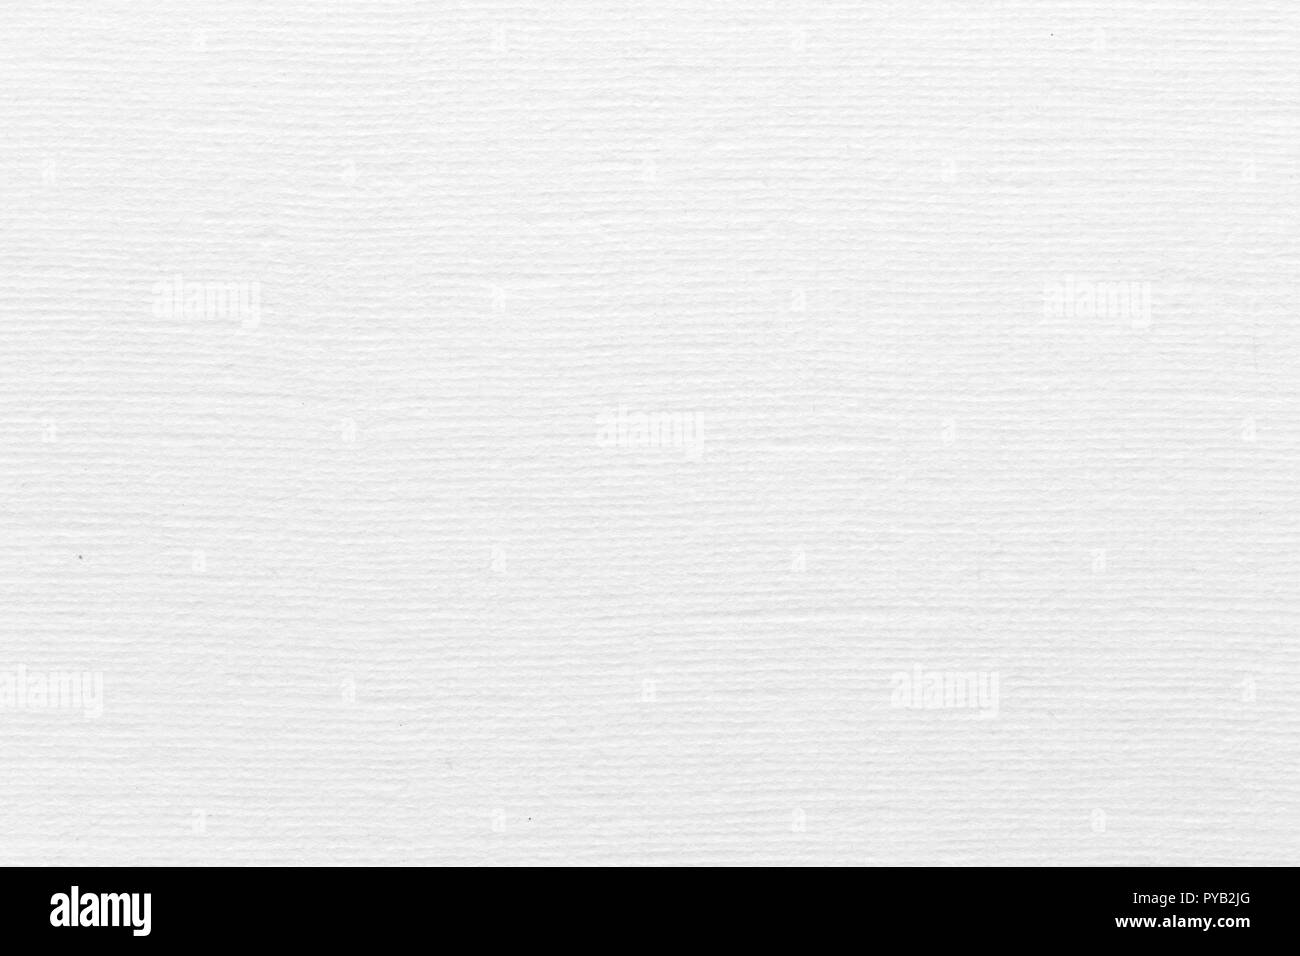 White paper texture background with soft pattern.  Stock Photo